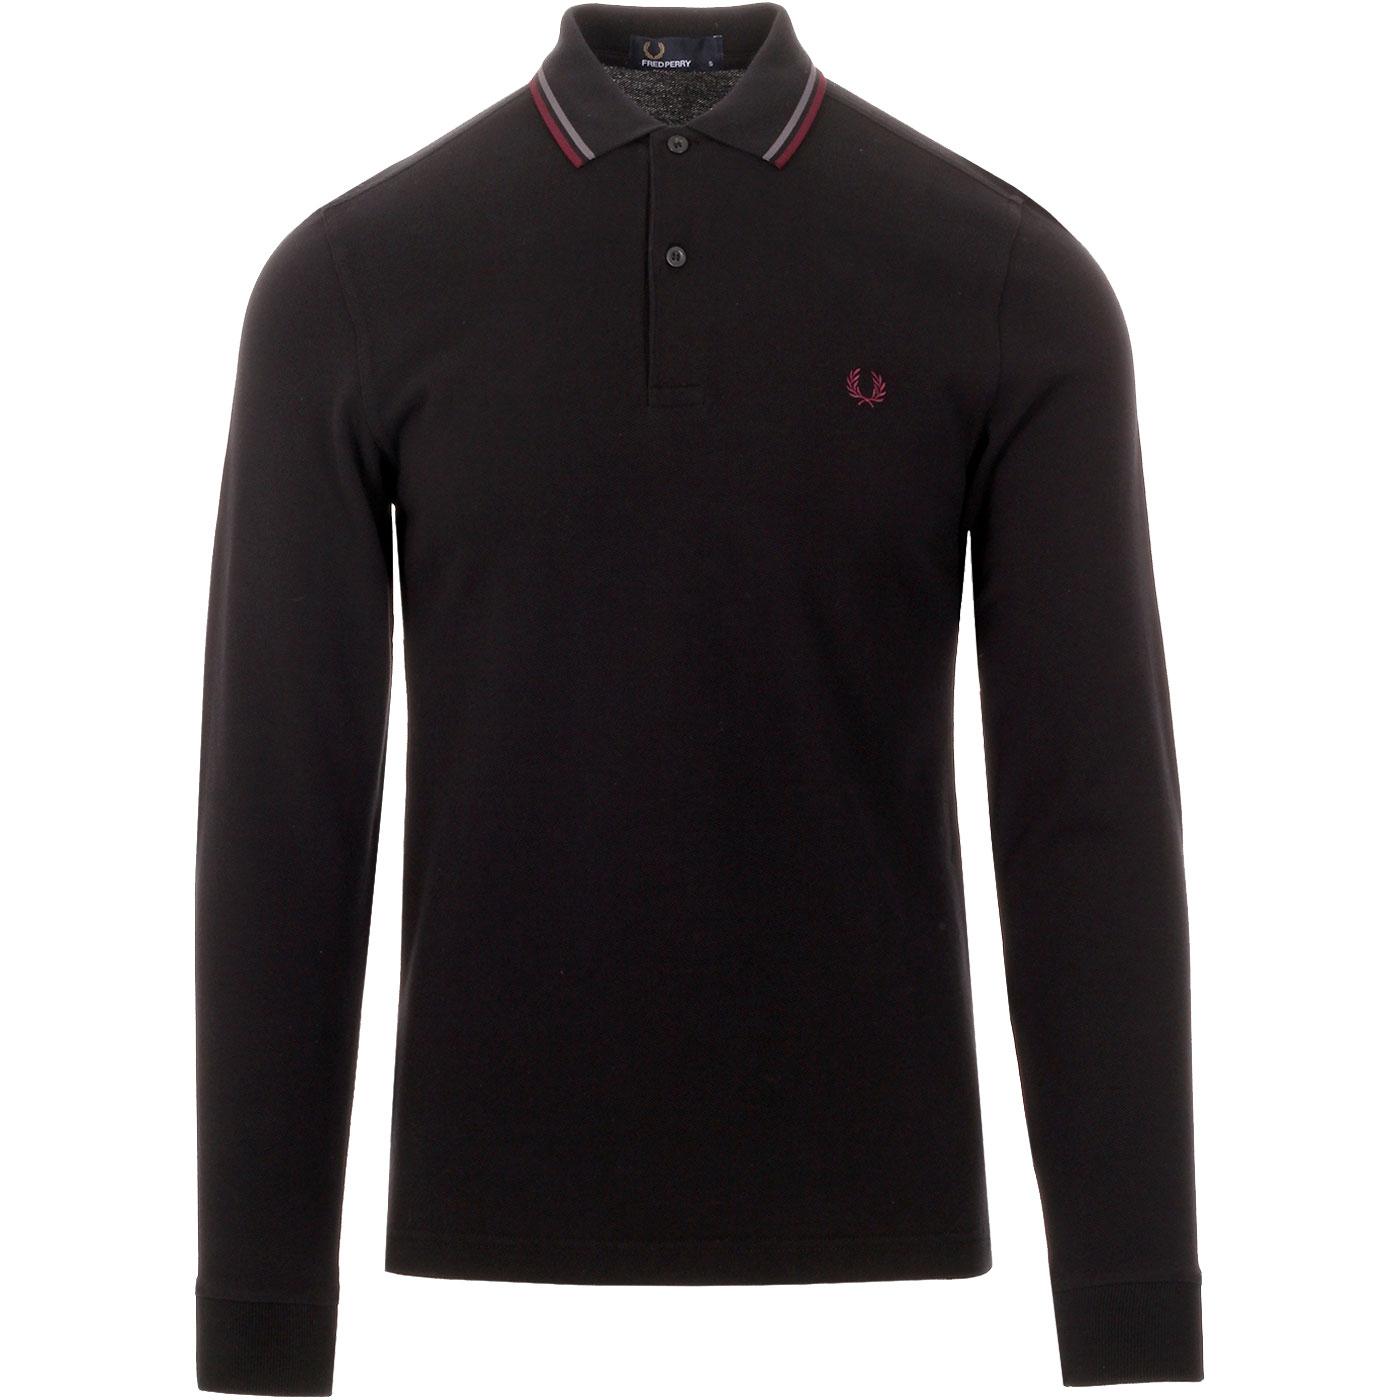 FRED PERRY Men's Mod Twin Tipped Long Sleeve Polo